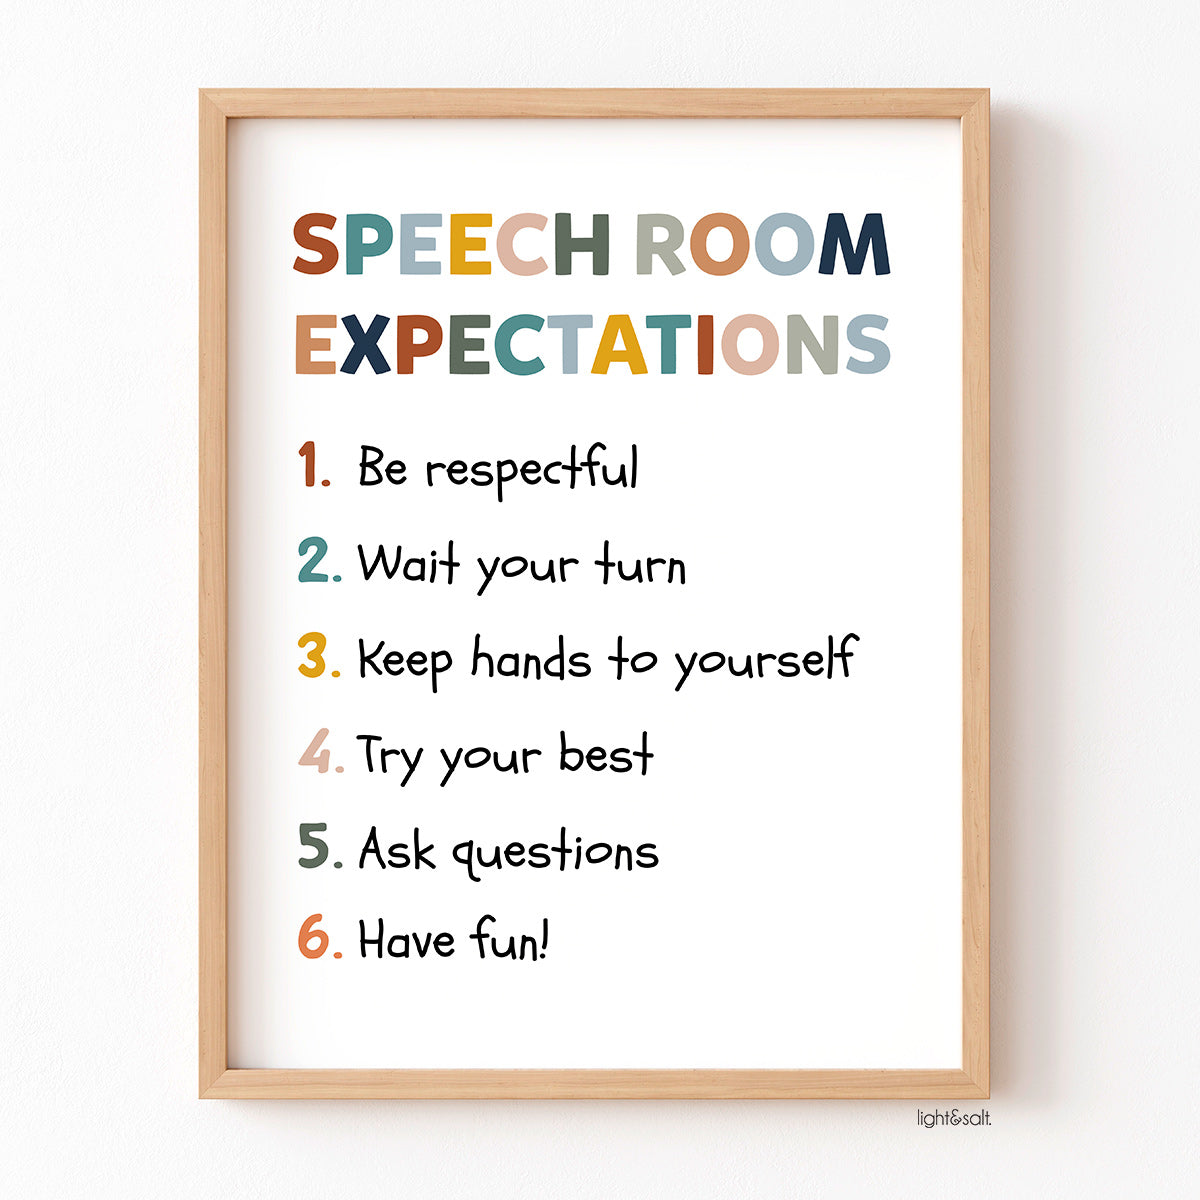 Speech room expectations poster